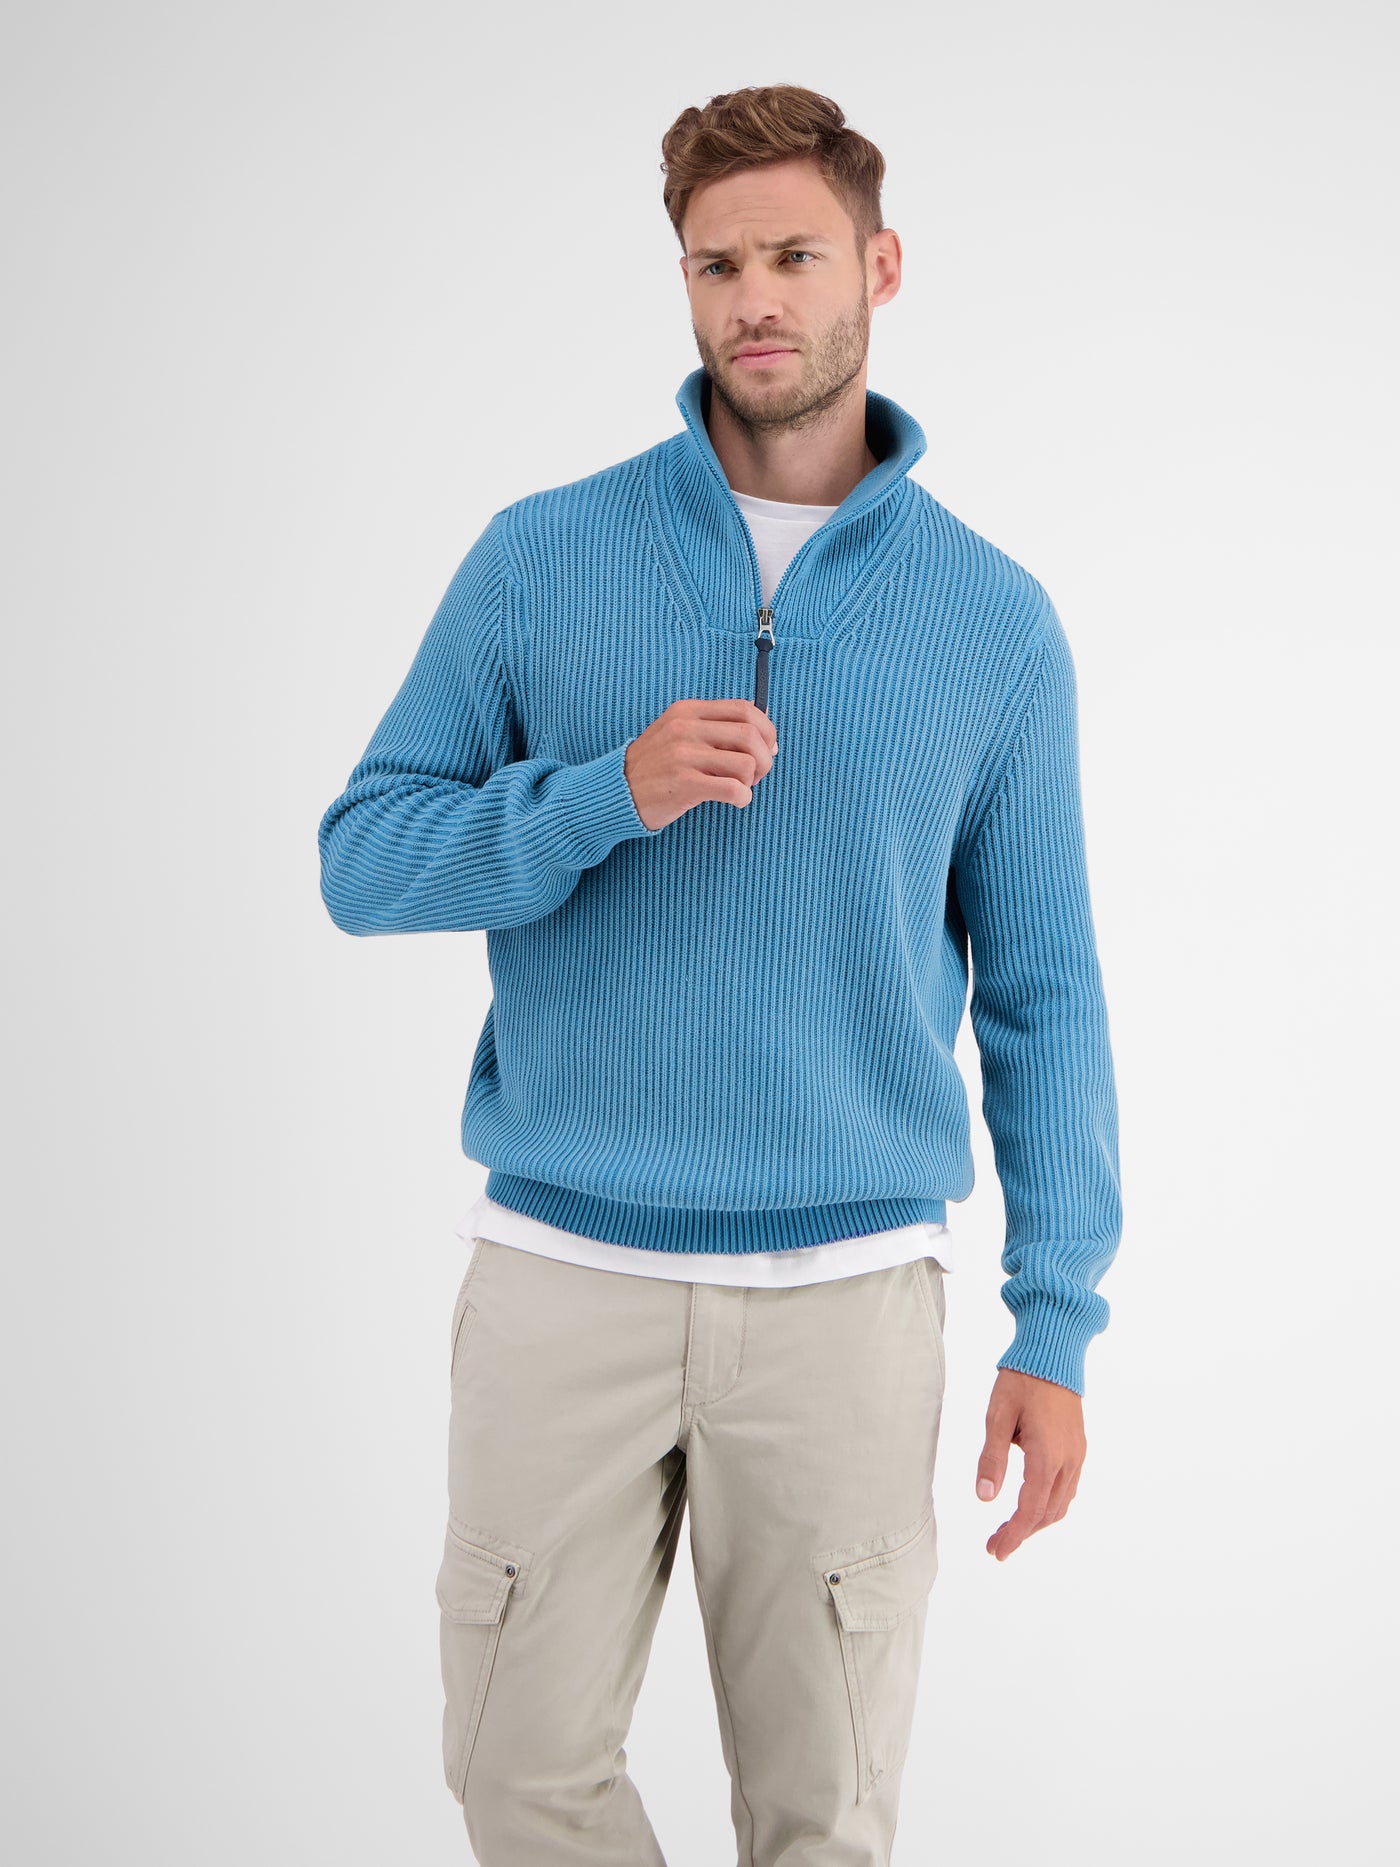 Knitted sweater in Troyer style